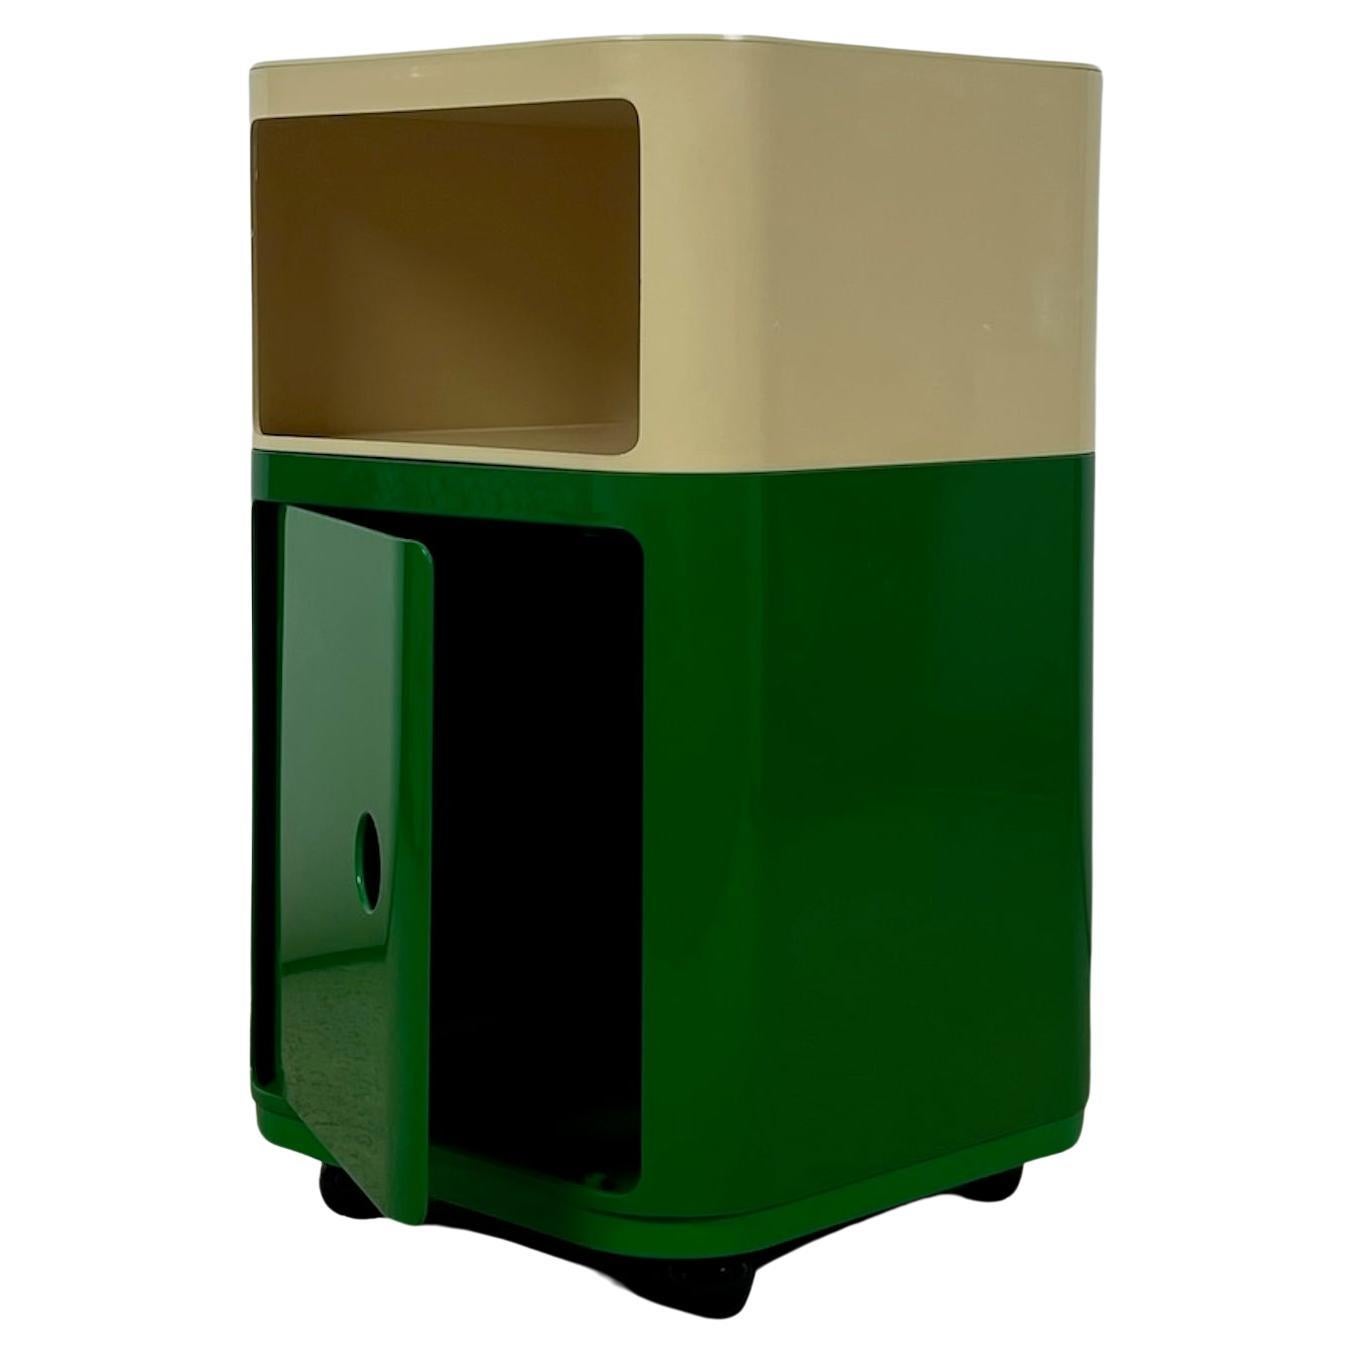 Kartell 'Componibili' Square Based Cabinet Modules in green and white, 1960s For Sale